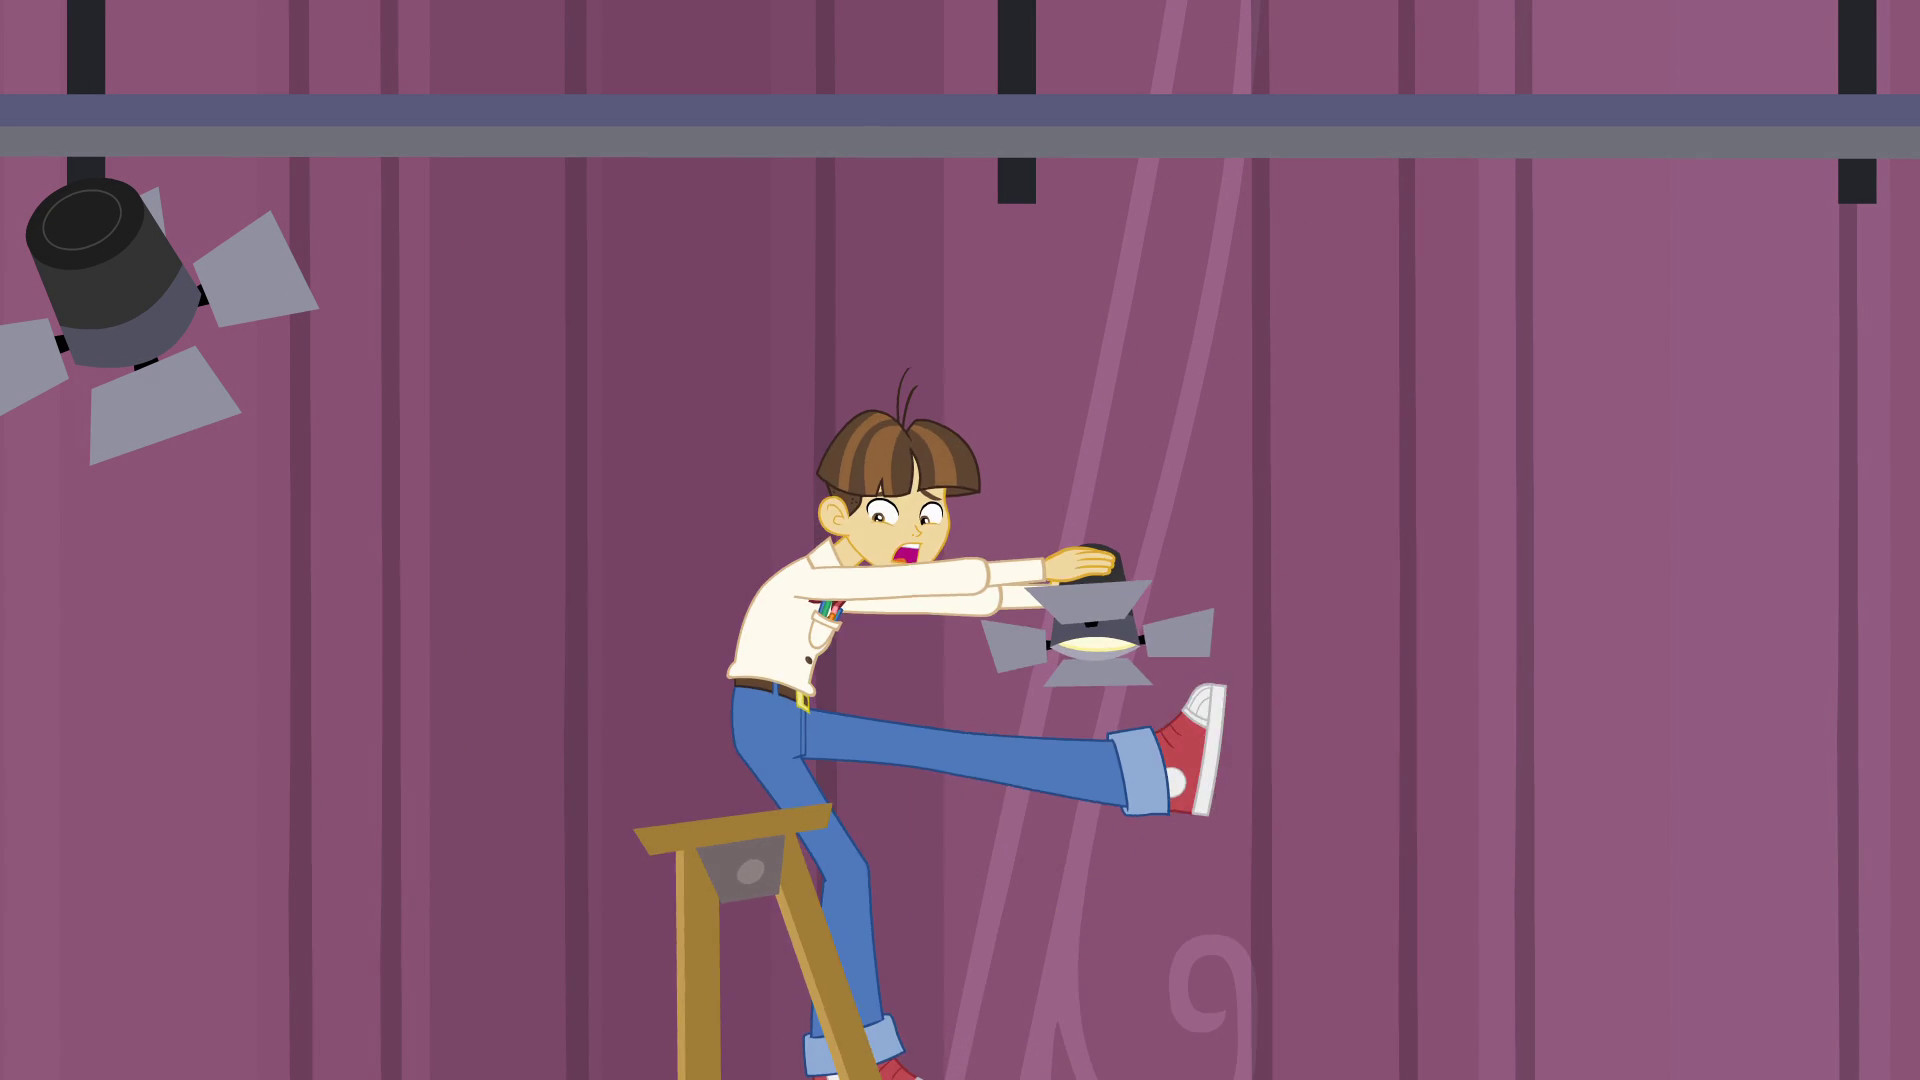 1920x1080 Techie kid almost falls off the ladder EG.png